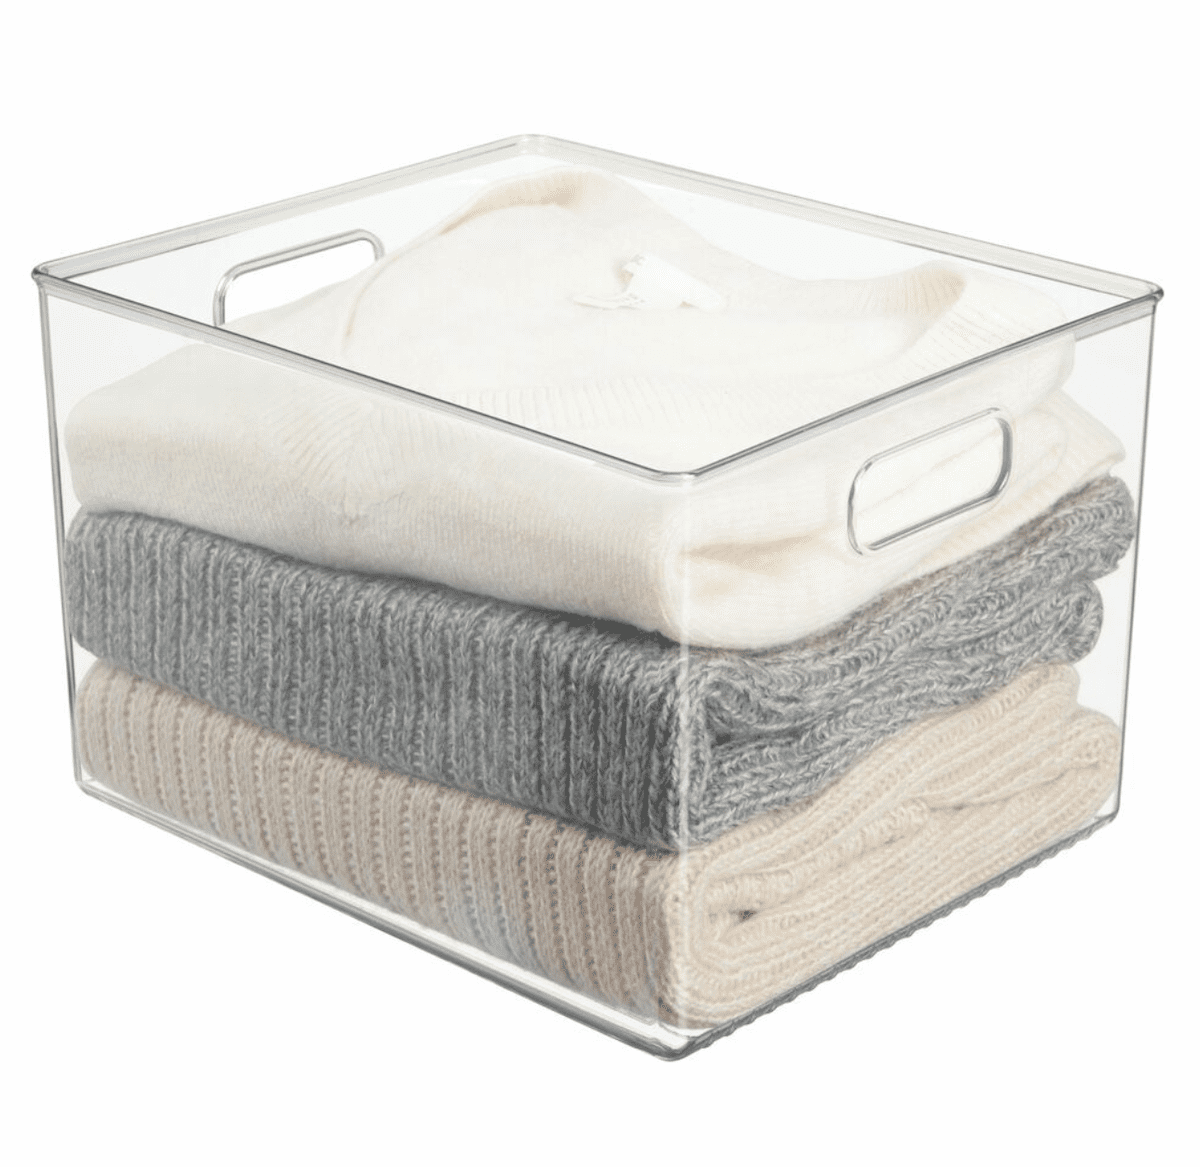 https://cdn.apartmenttherapy.info/image/upload/v1646408722/at/product%20listing/mDesign_Clear_Closet_Storage_Bin.png